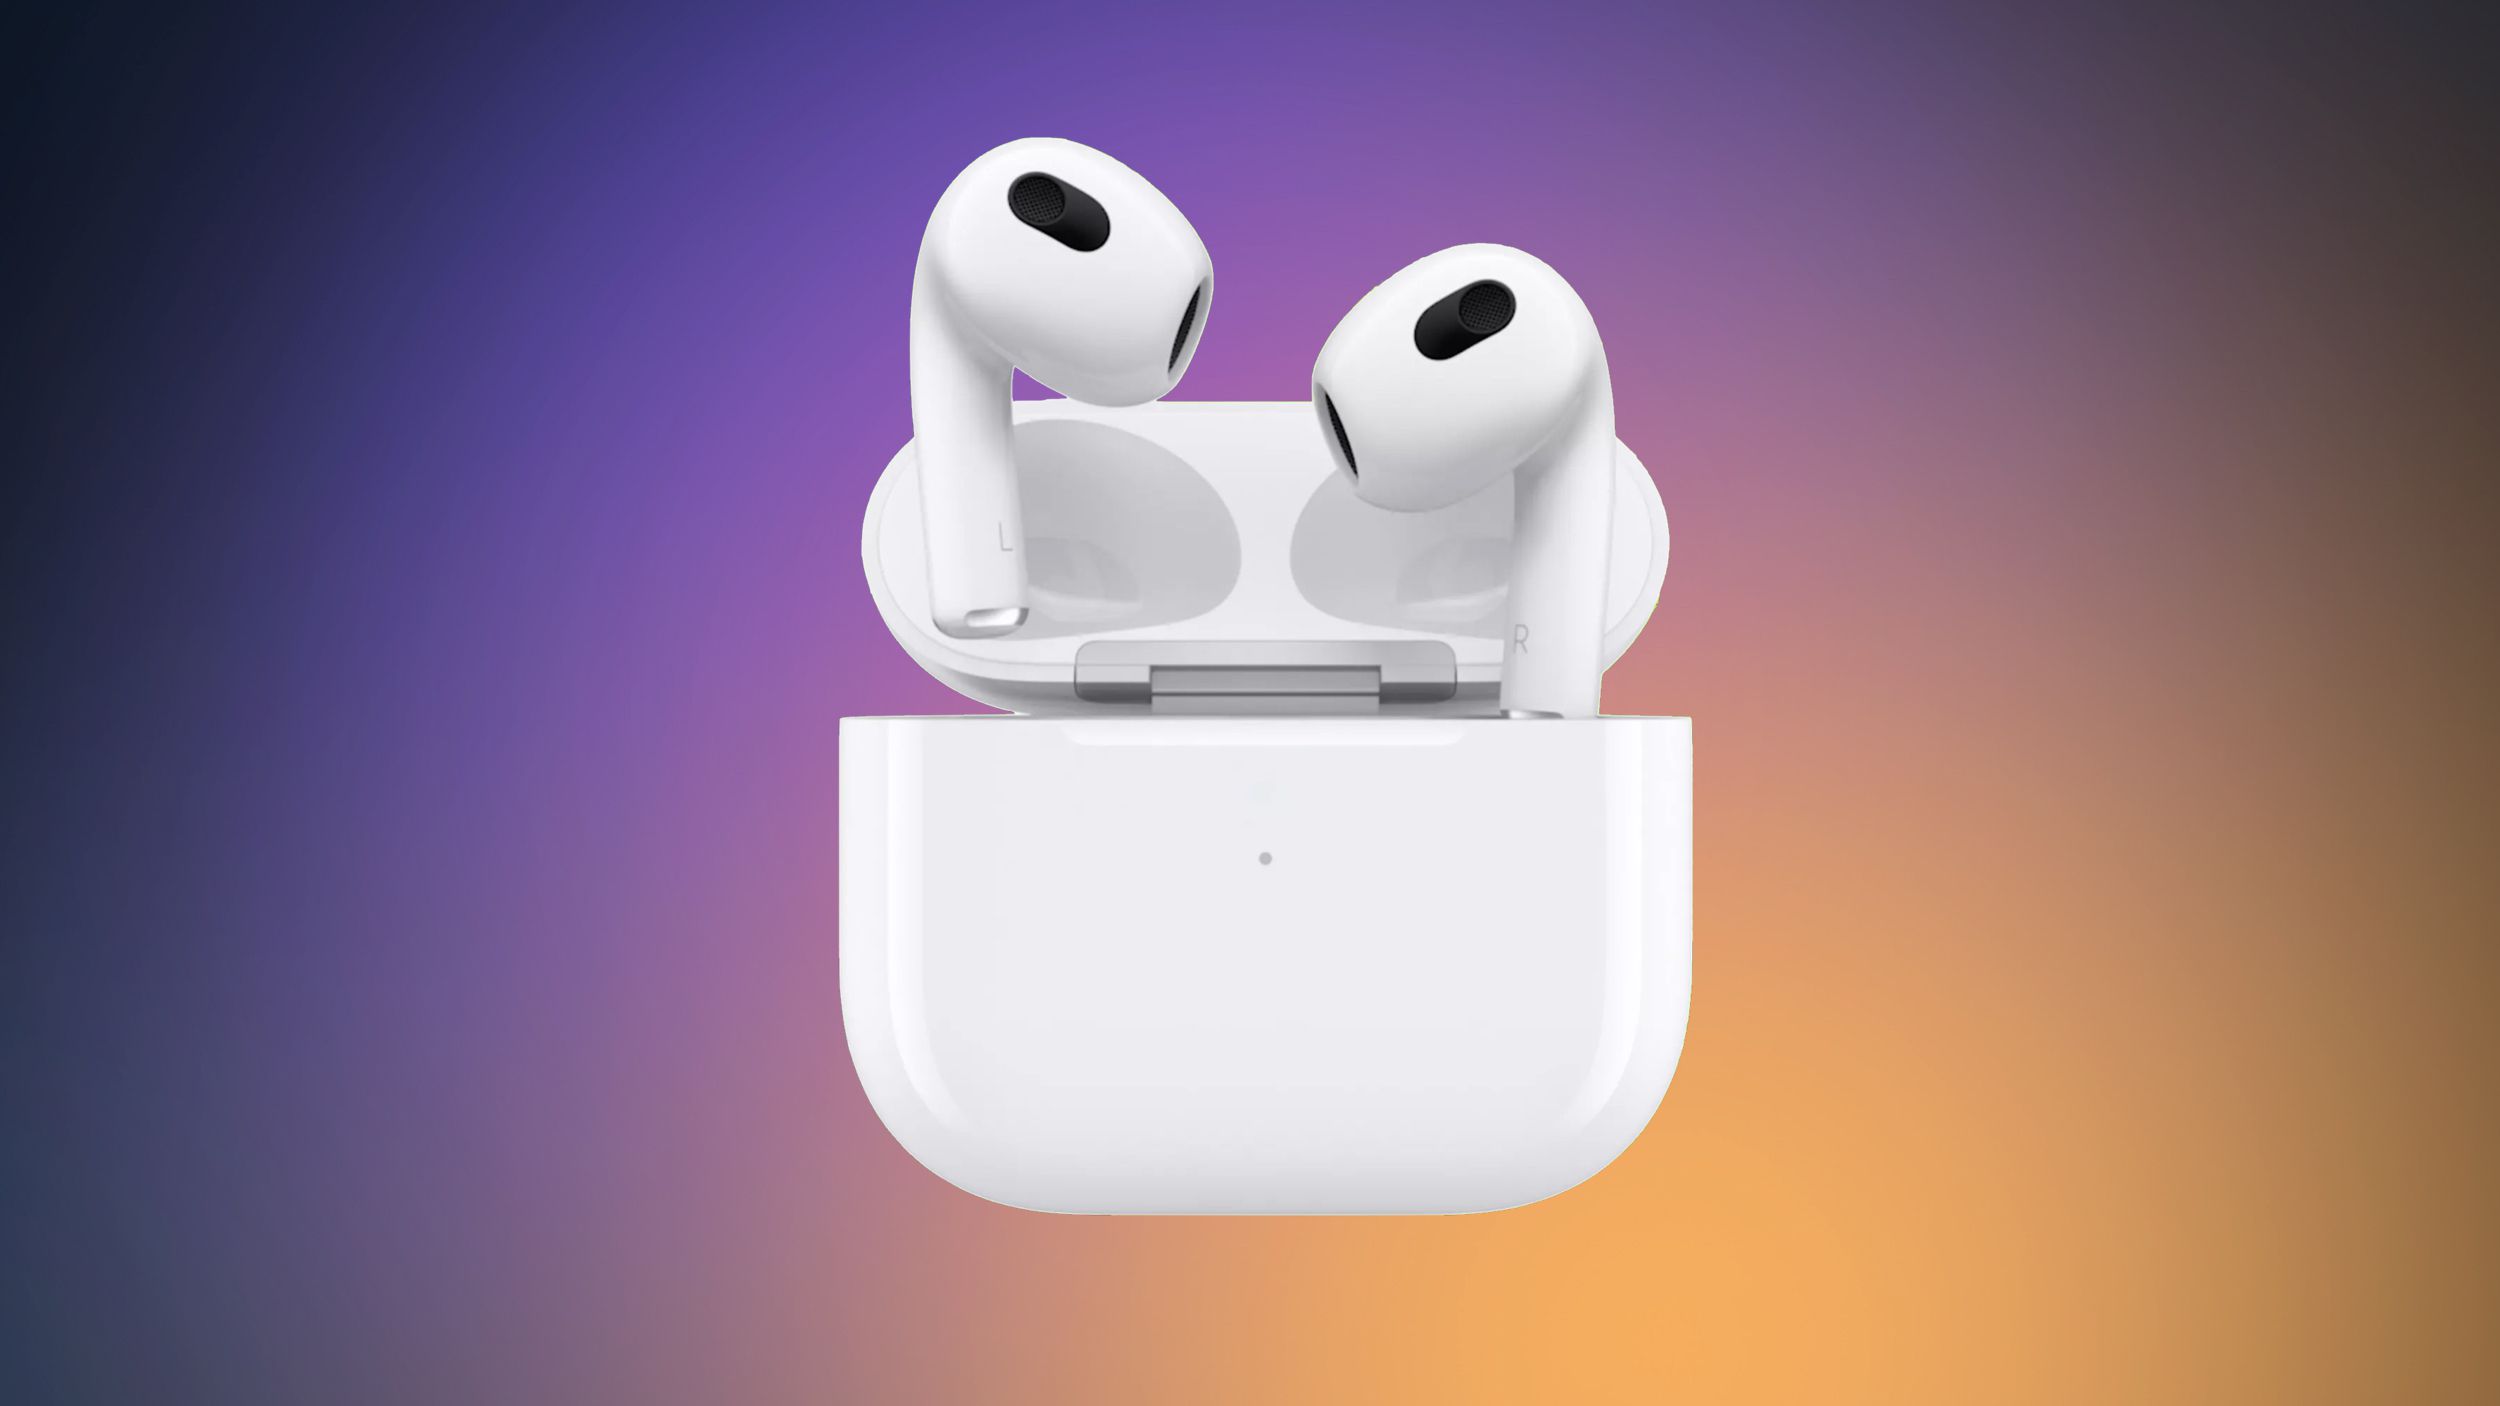 TikTok Trend Debunked: No, Apple Is Not Giving Away Free AirPods